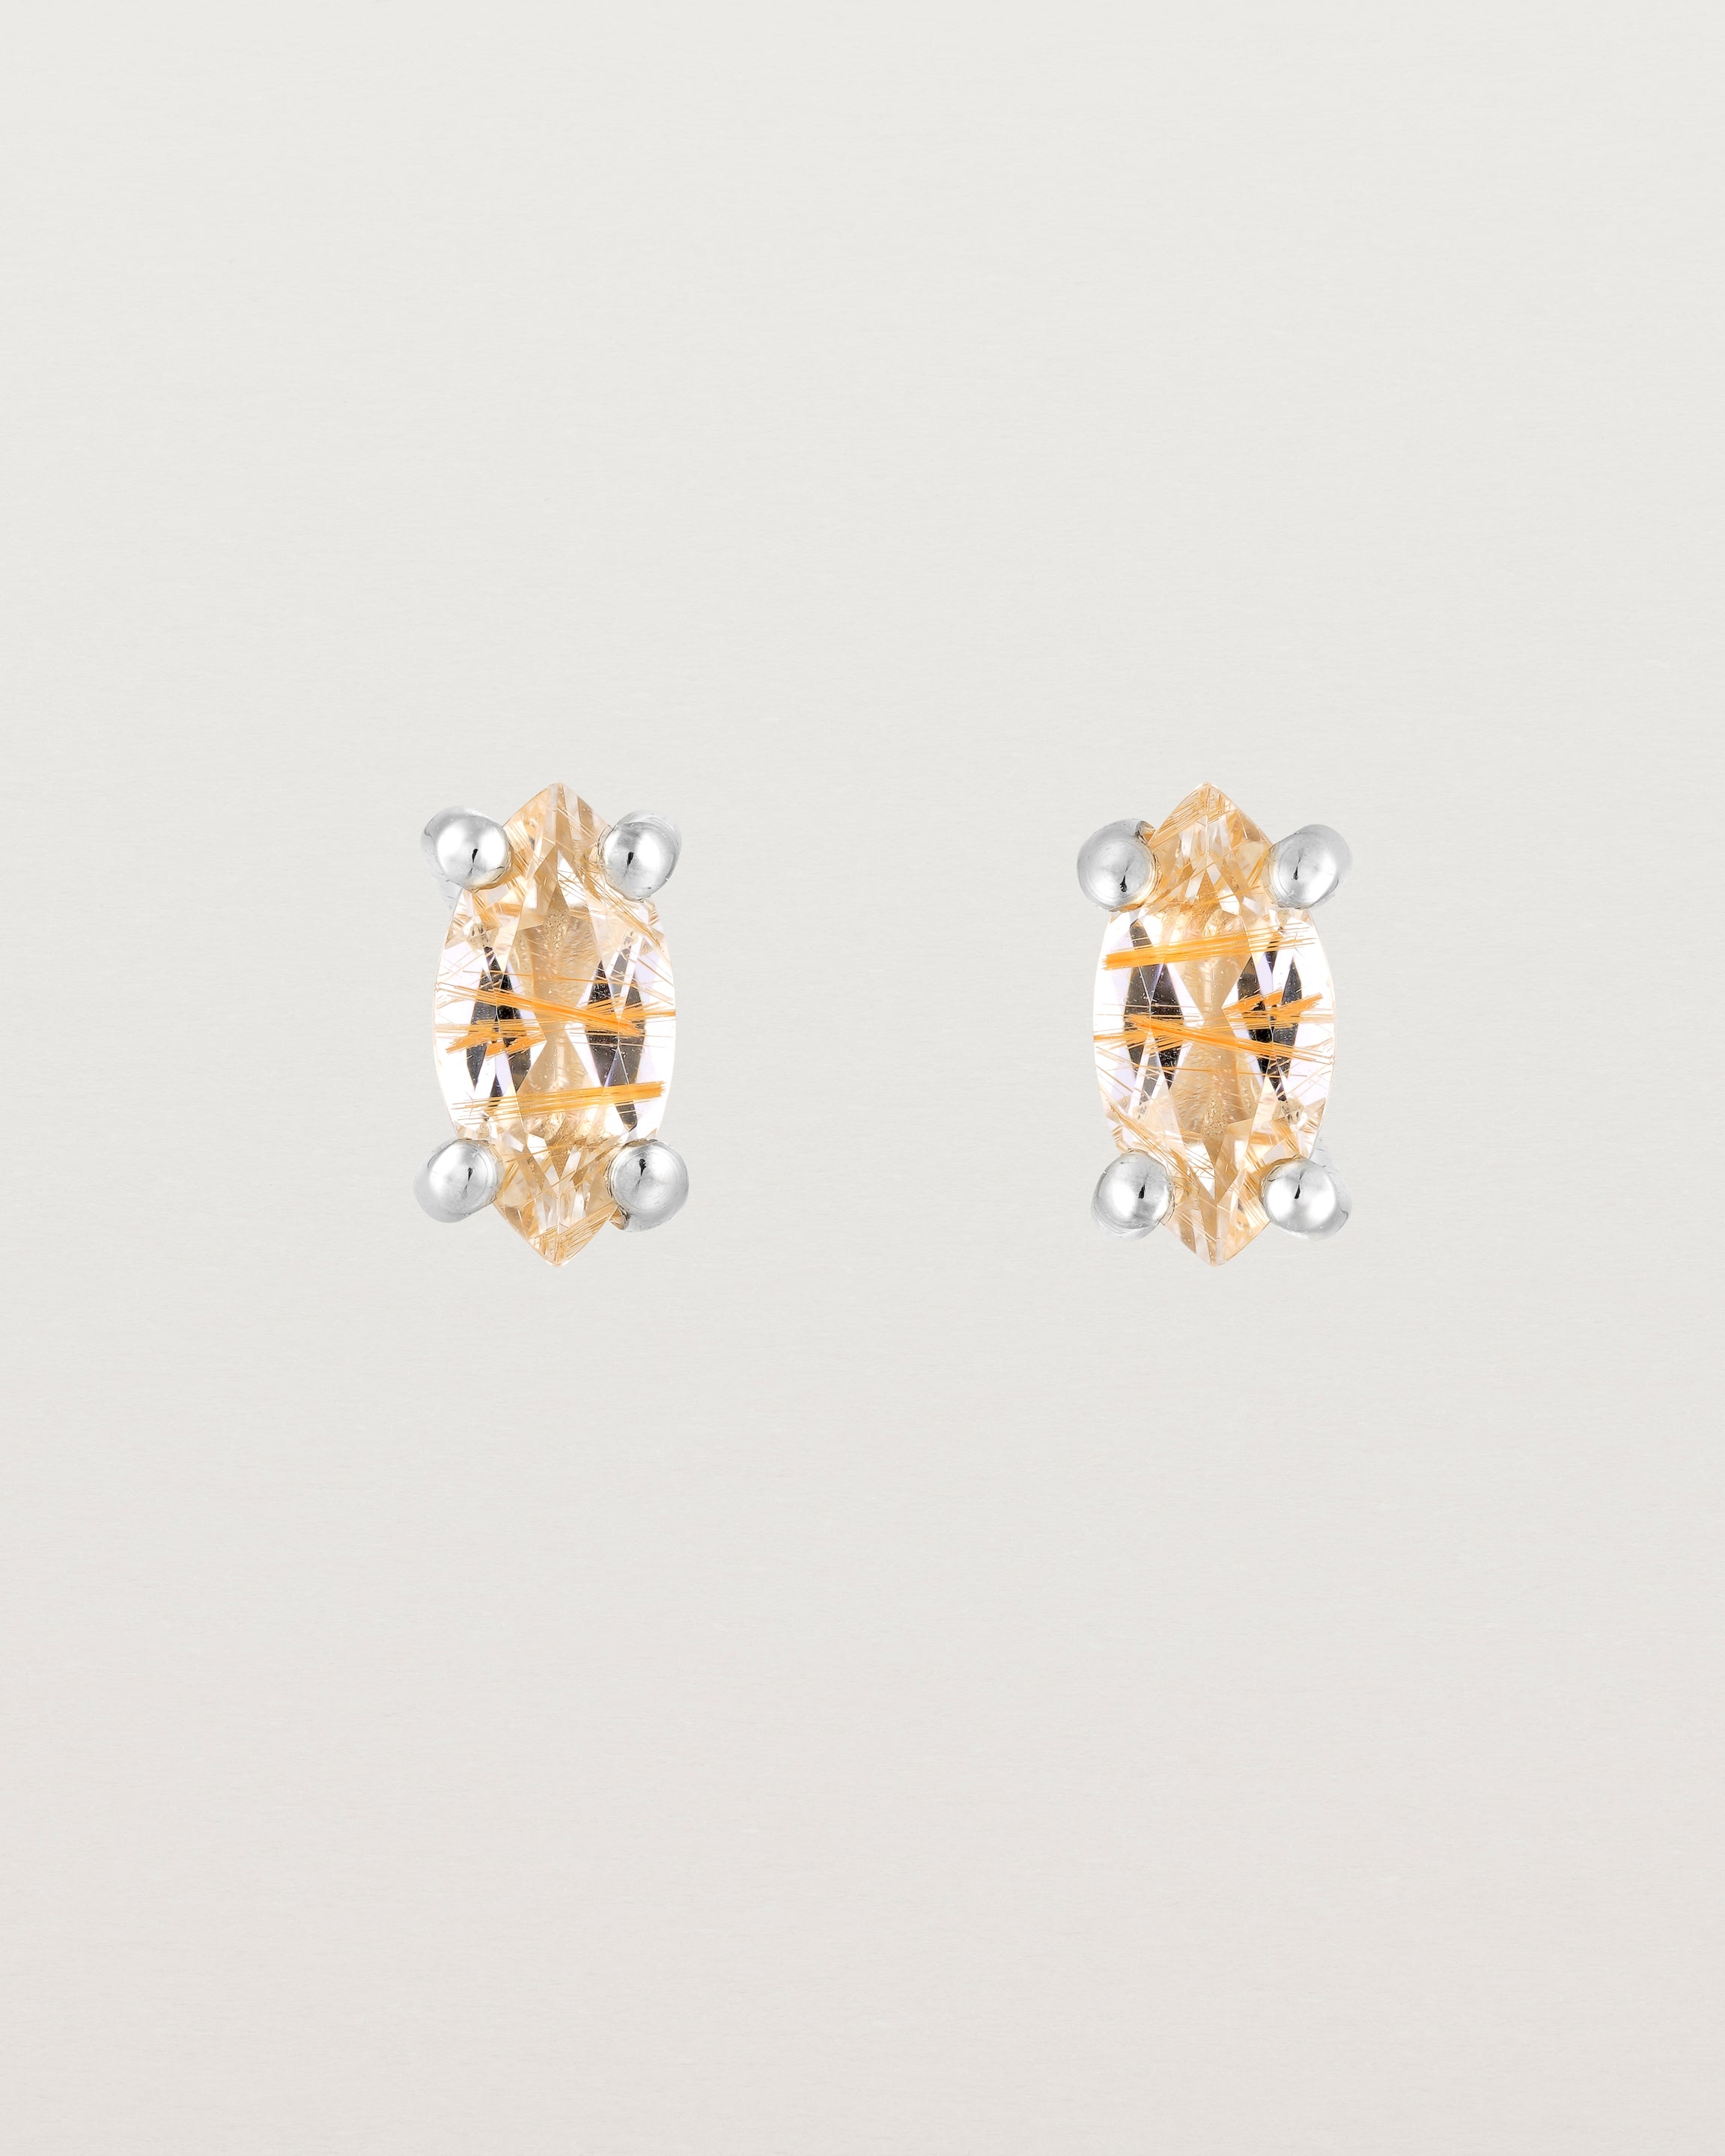 A pair of sterling silver studs featuring a marquise shaped light yellow rutilated quartz